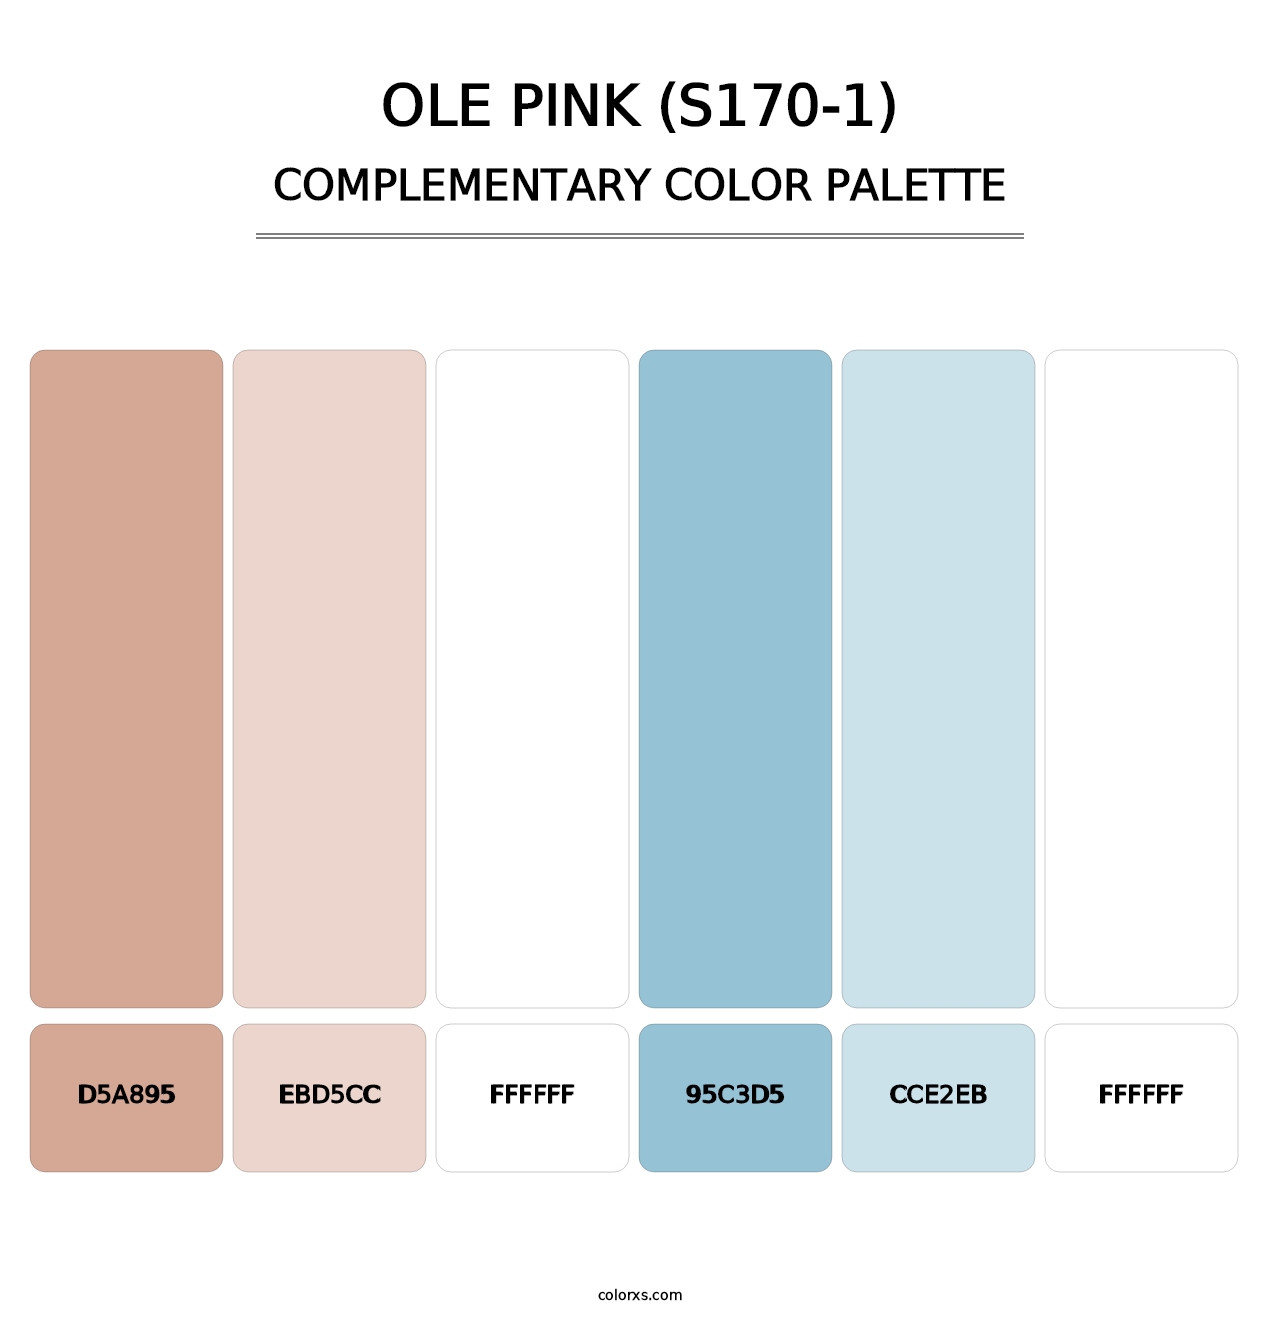 Ole Pink (S170-1) - Complementary Color Palette